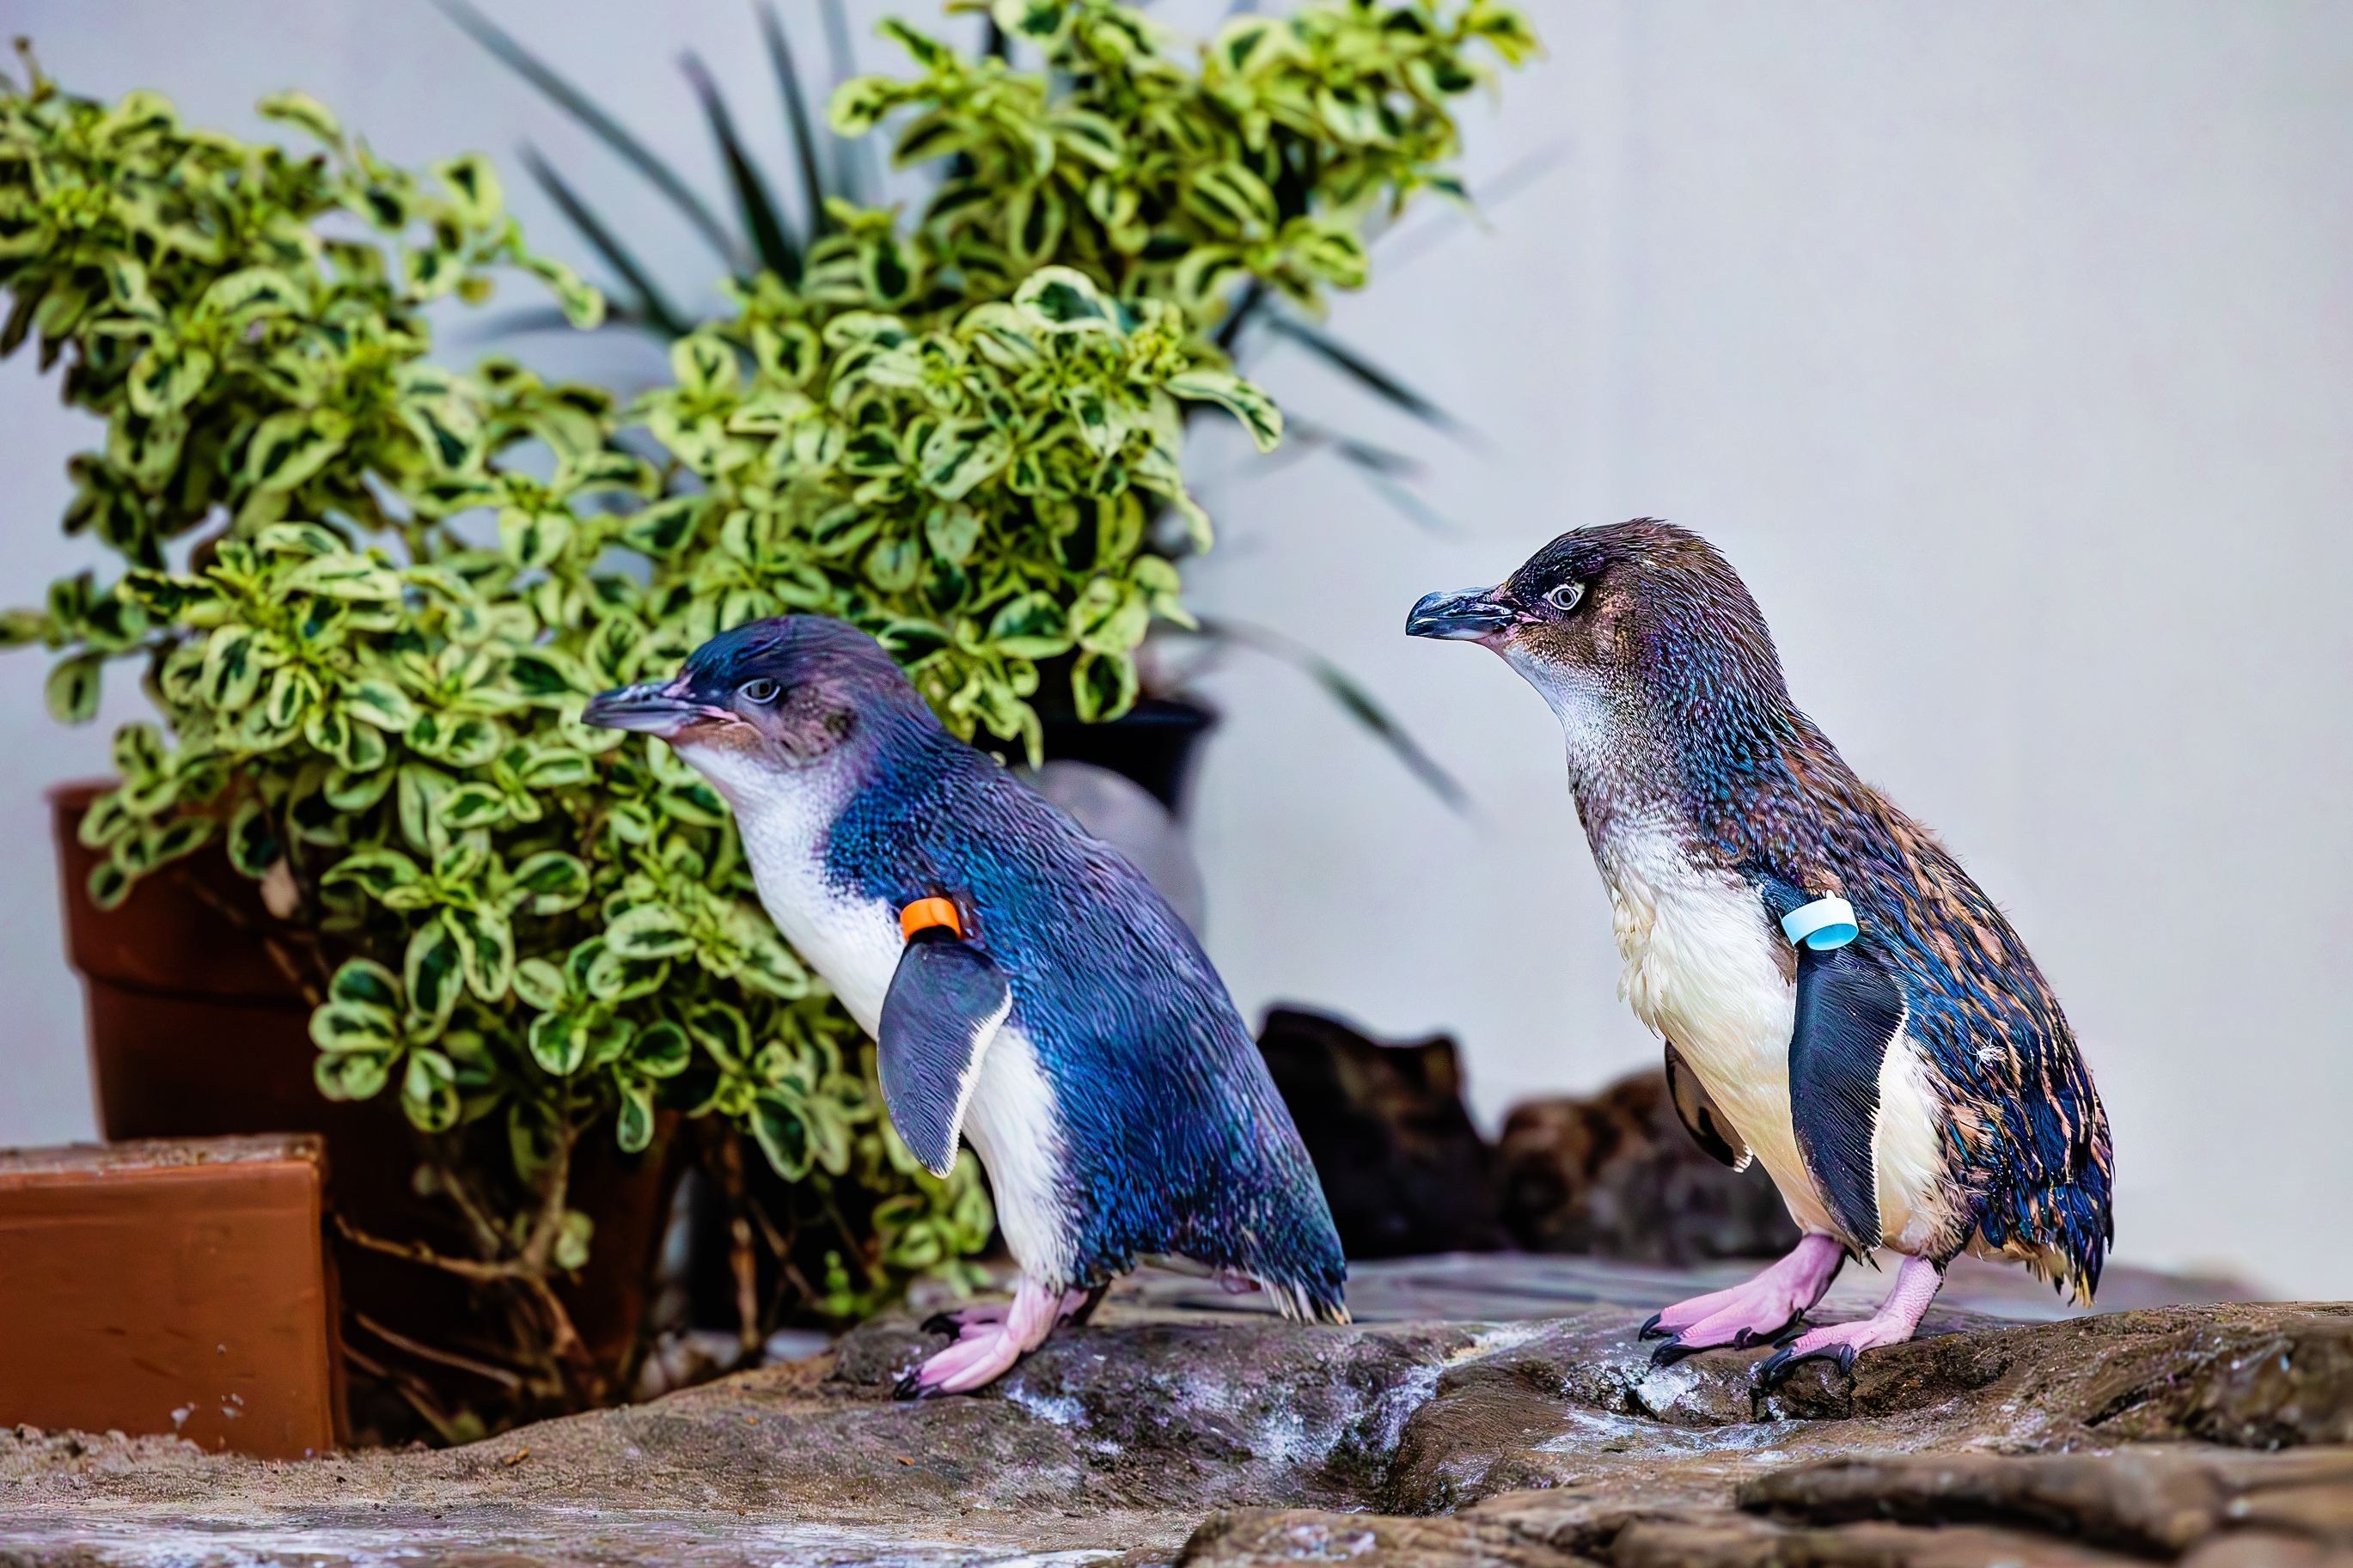 Two Little Blue Penguins waddle around their habitat.